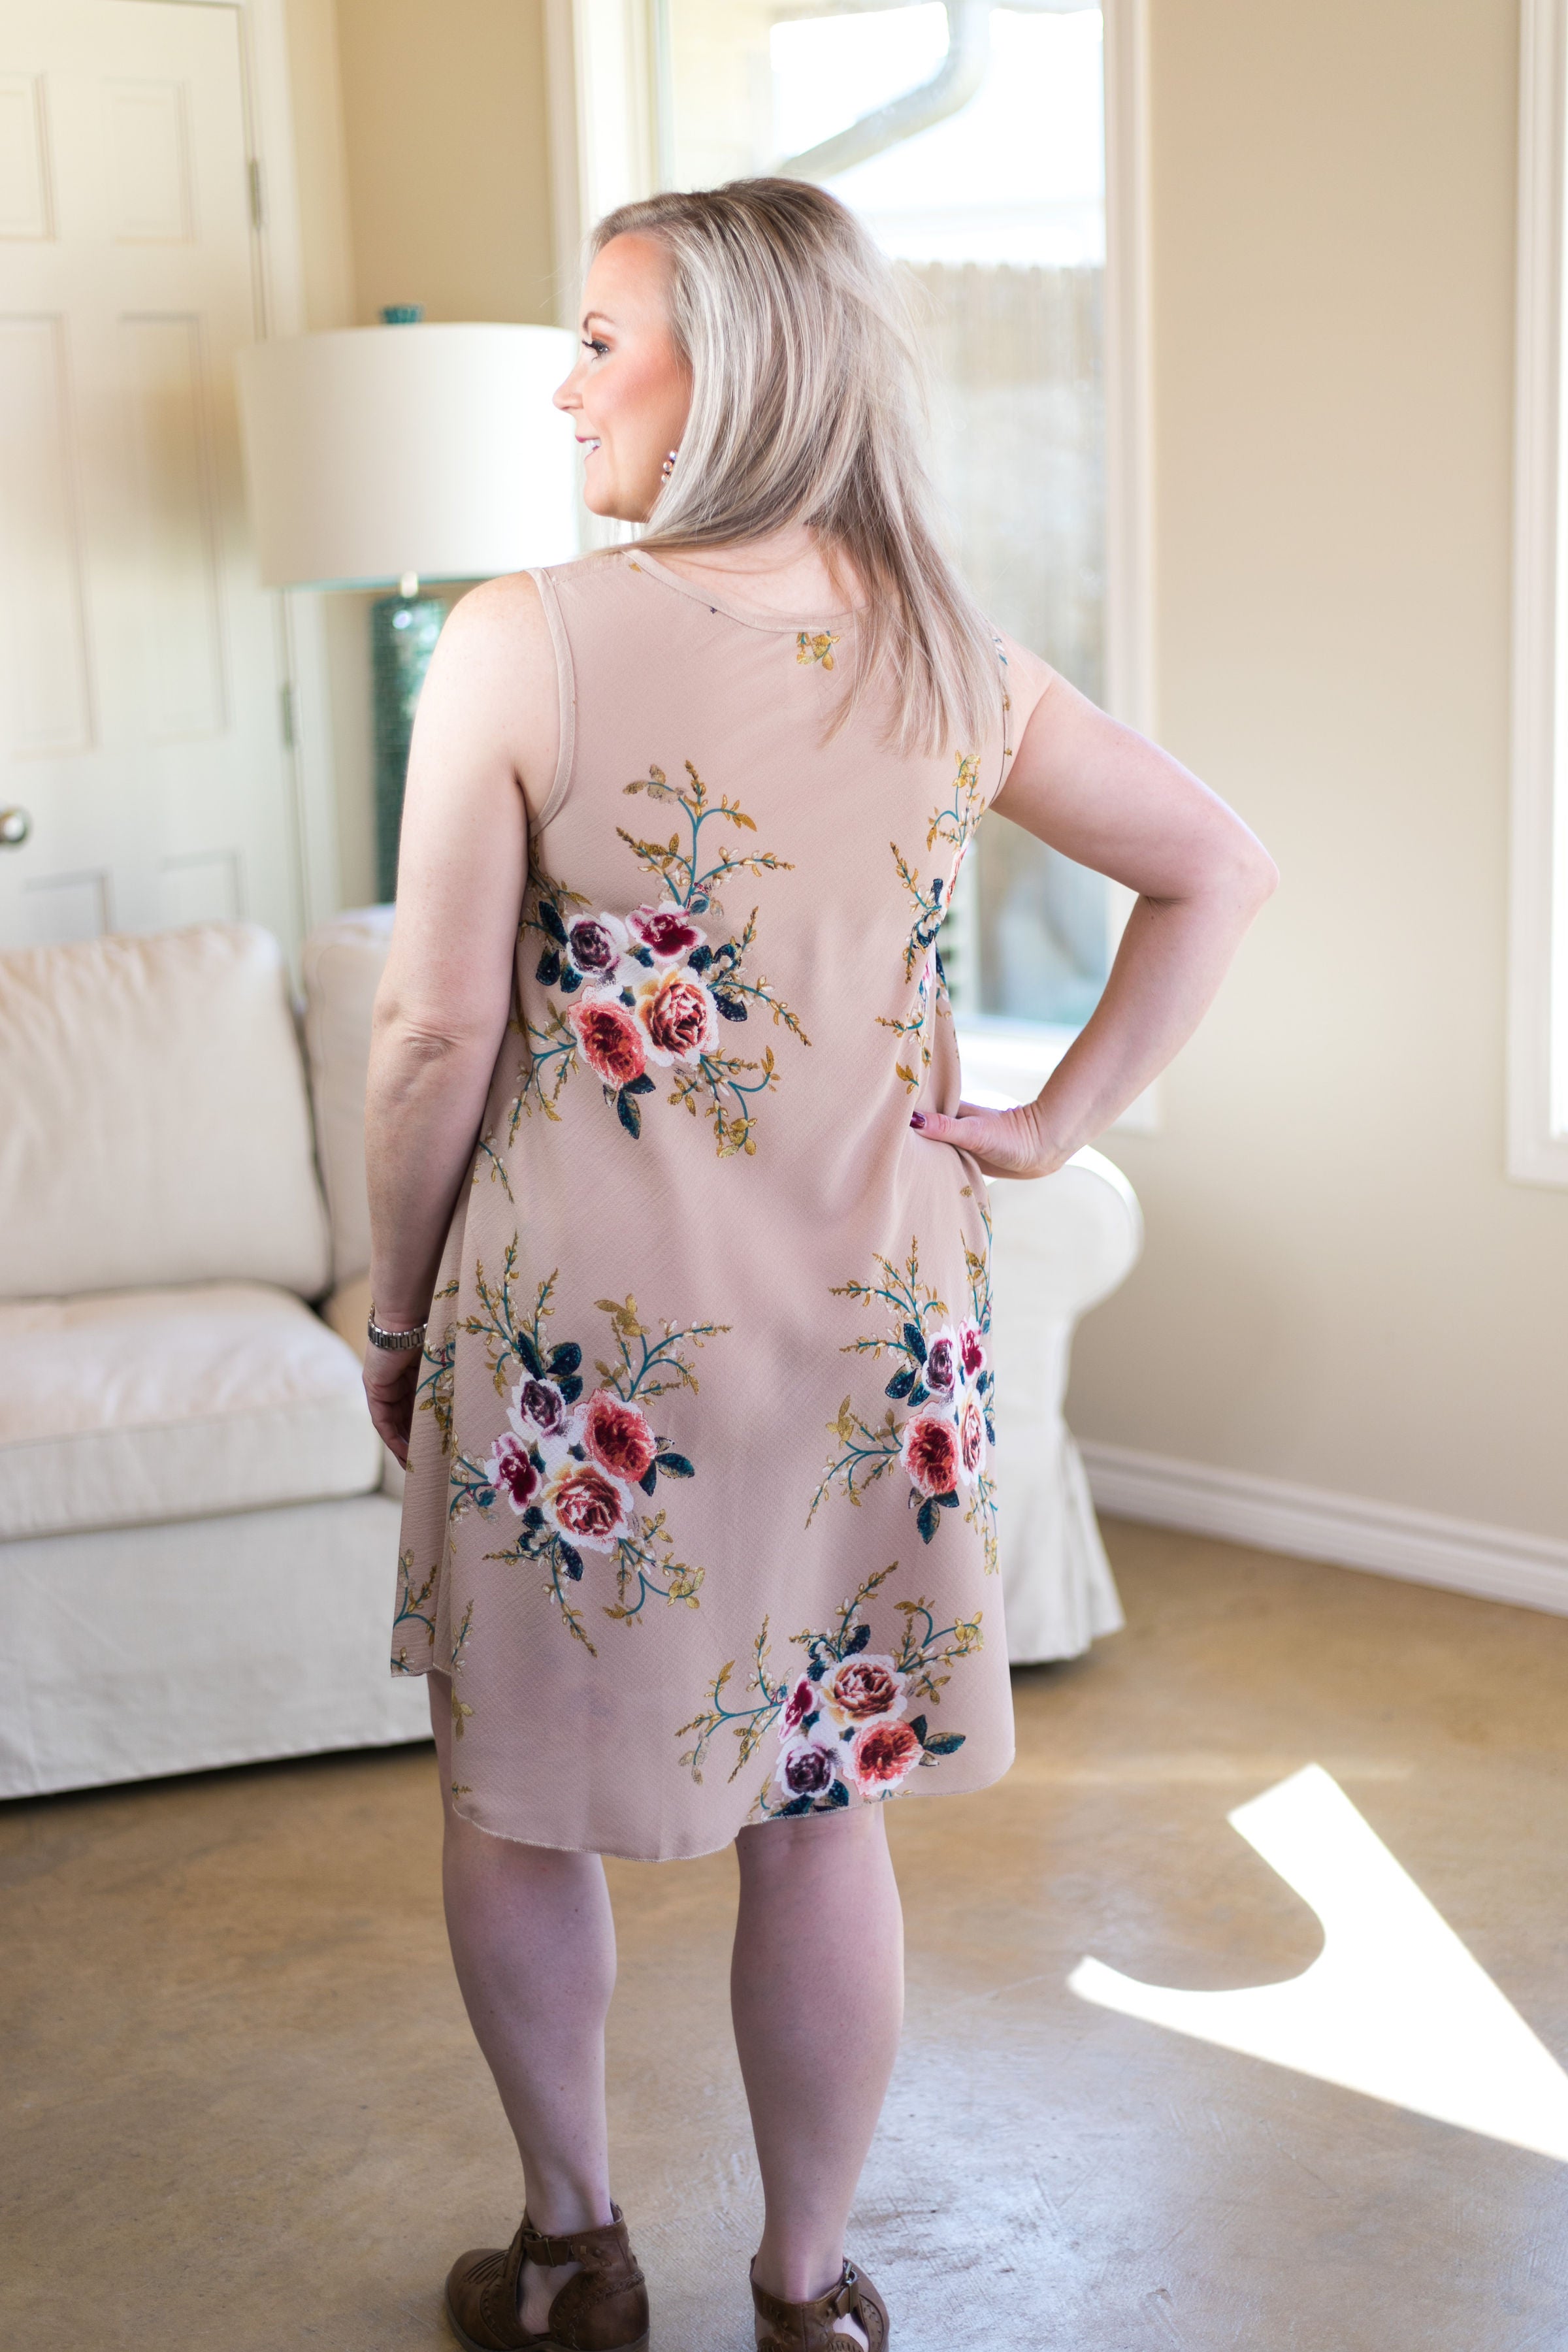 Last Chance Size S/M | What I'm About Floral A Line Dress in Tan - Giddy Up Glamour Boutique